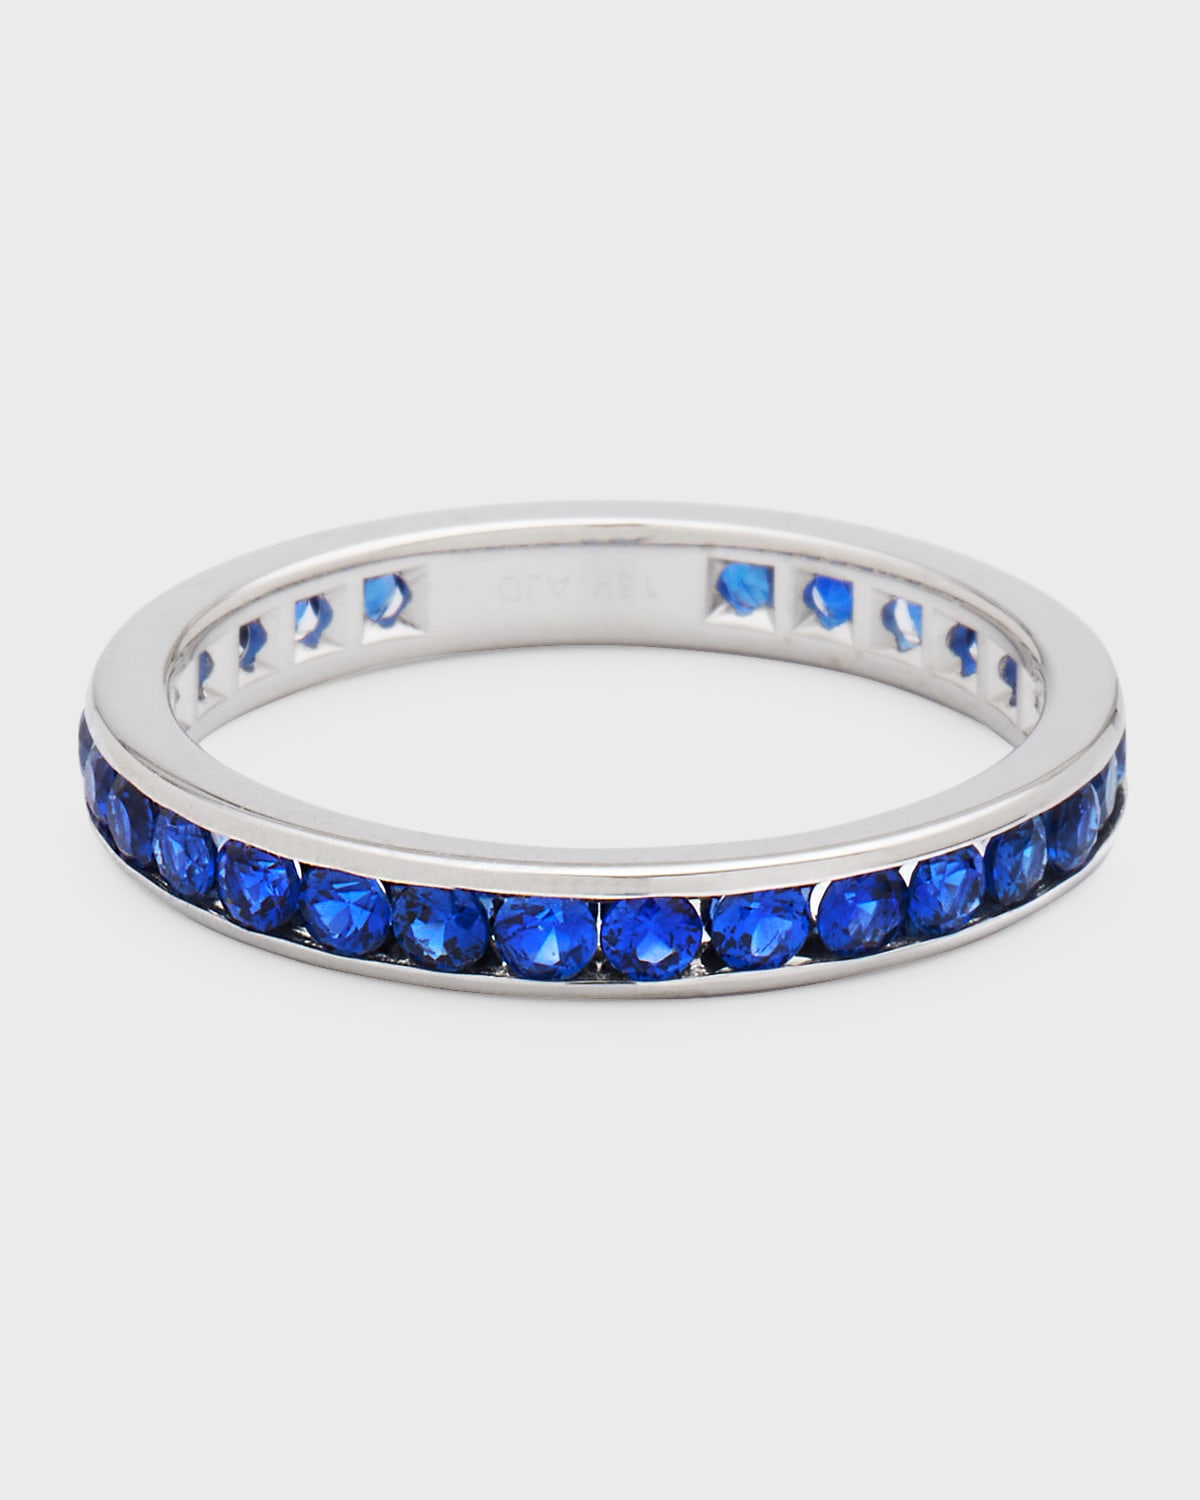 NM Diamond Collection 18k White Gold Blue Sapphire Eternity Ring, Size 7